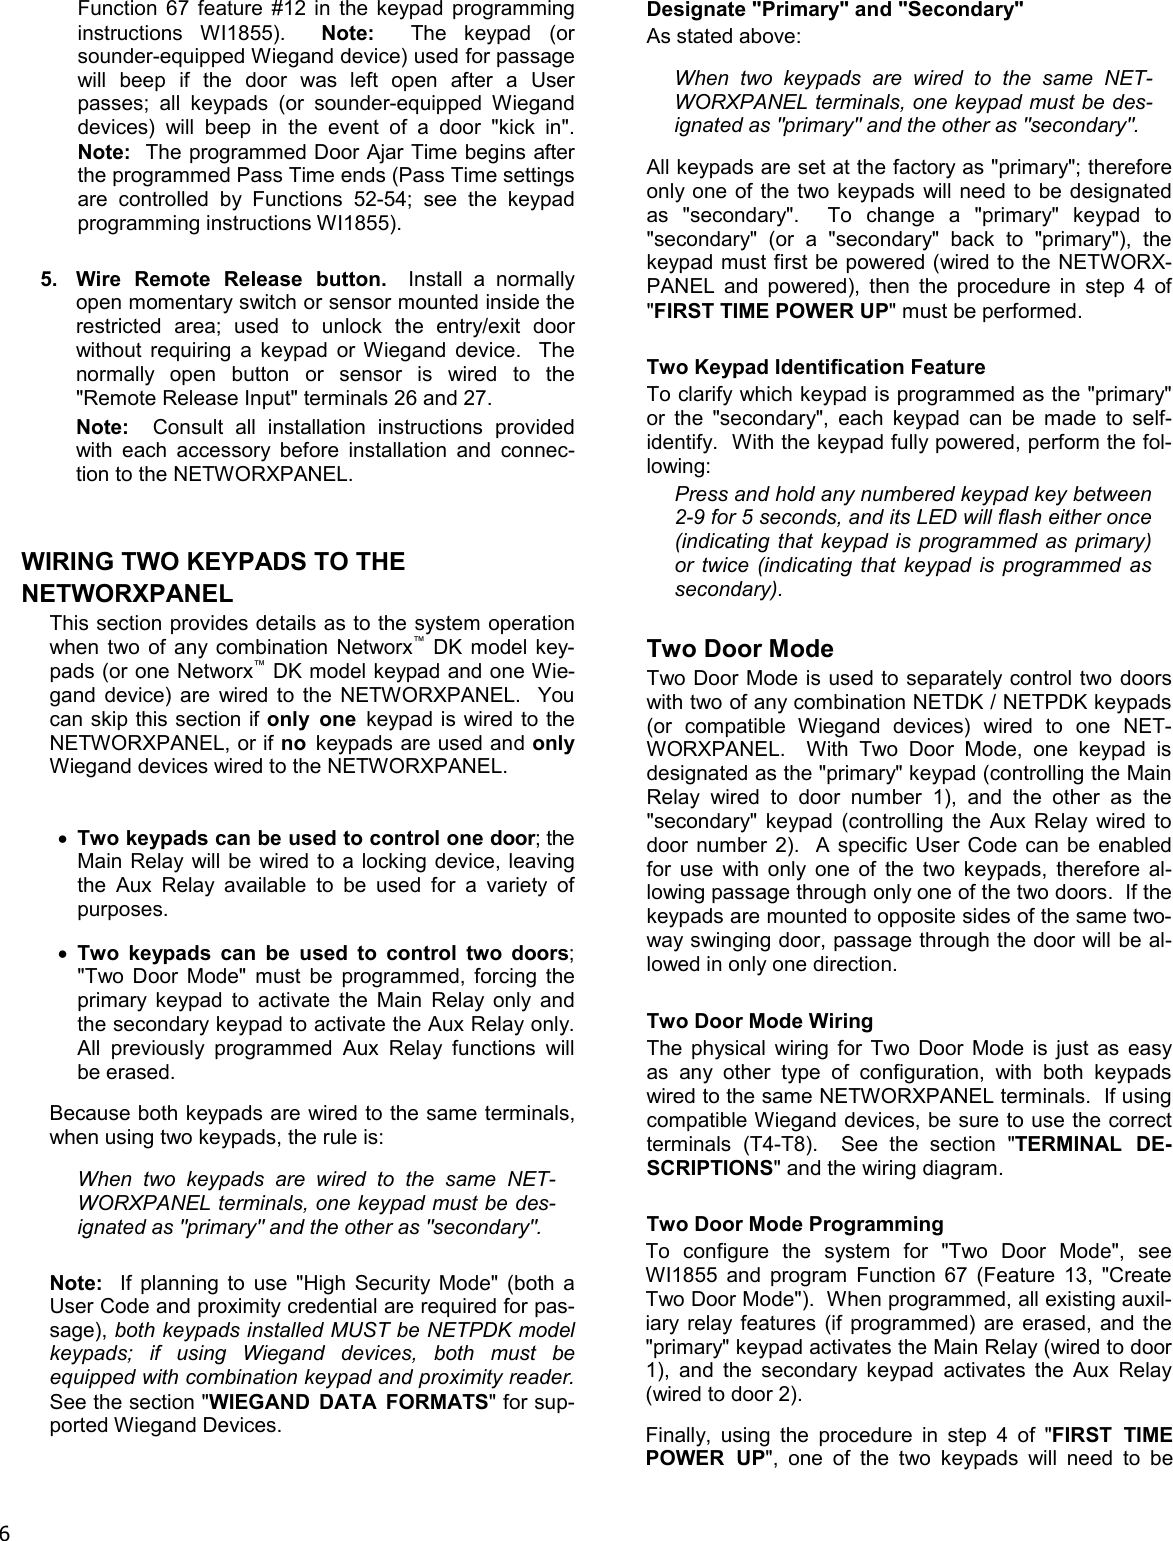 Page 6 of 12 - Alarm Lock NETWORXPANEL_WI1856B.02_INST NETWORXPANEL Wireless Networx Control Panel (NETDK/NETPDK) Installation Instructions WI1856B.02 INST